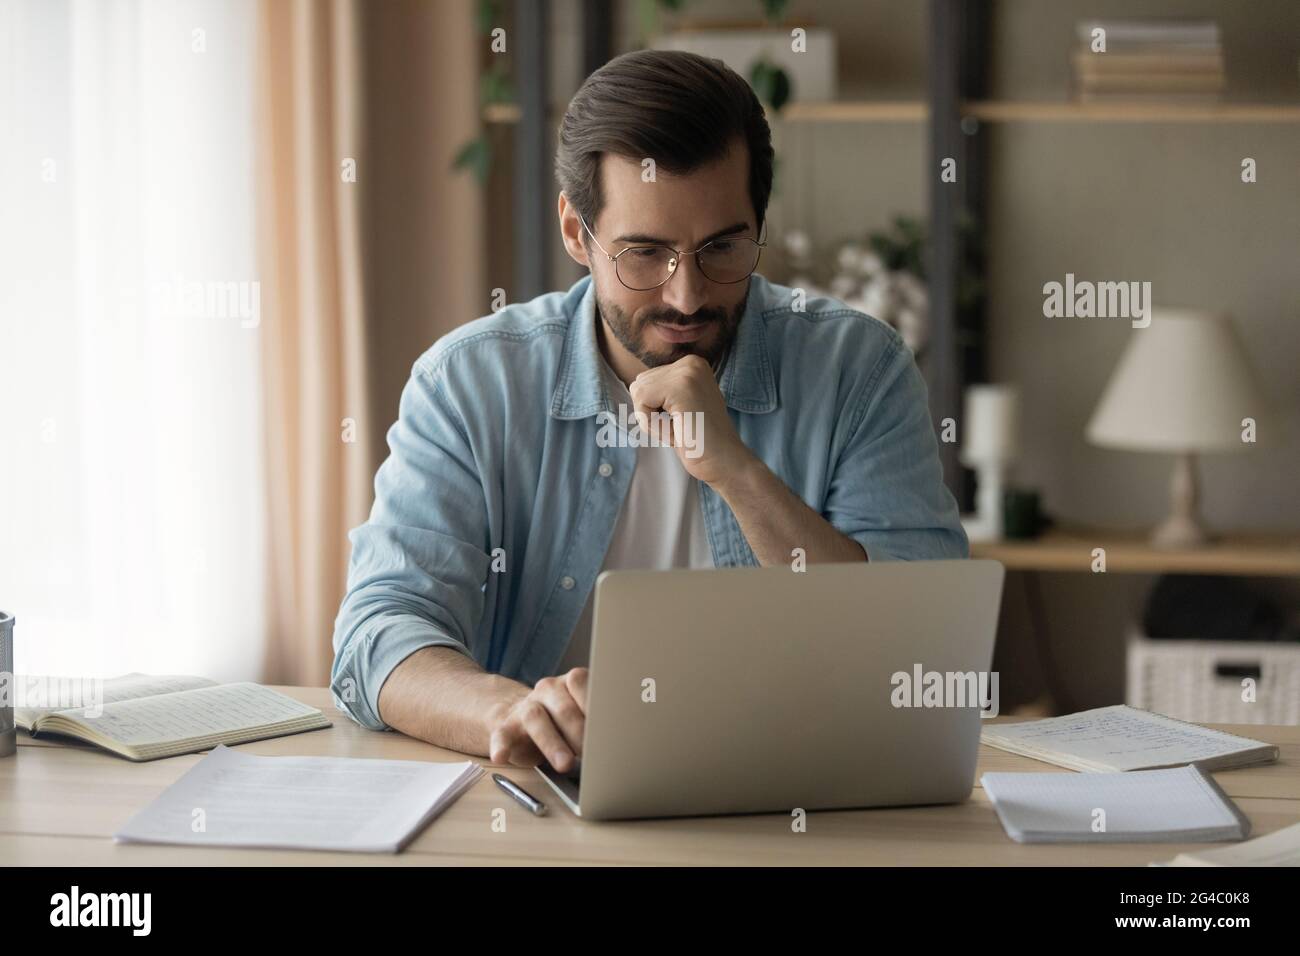 Concentrated happy young business man working on computer at home. Stock Photo